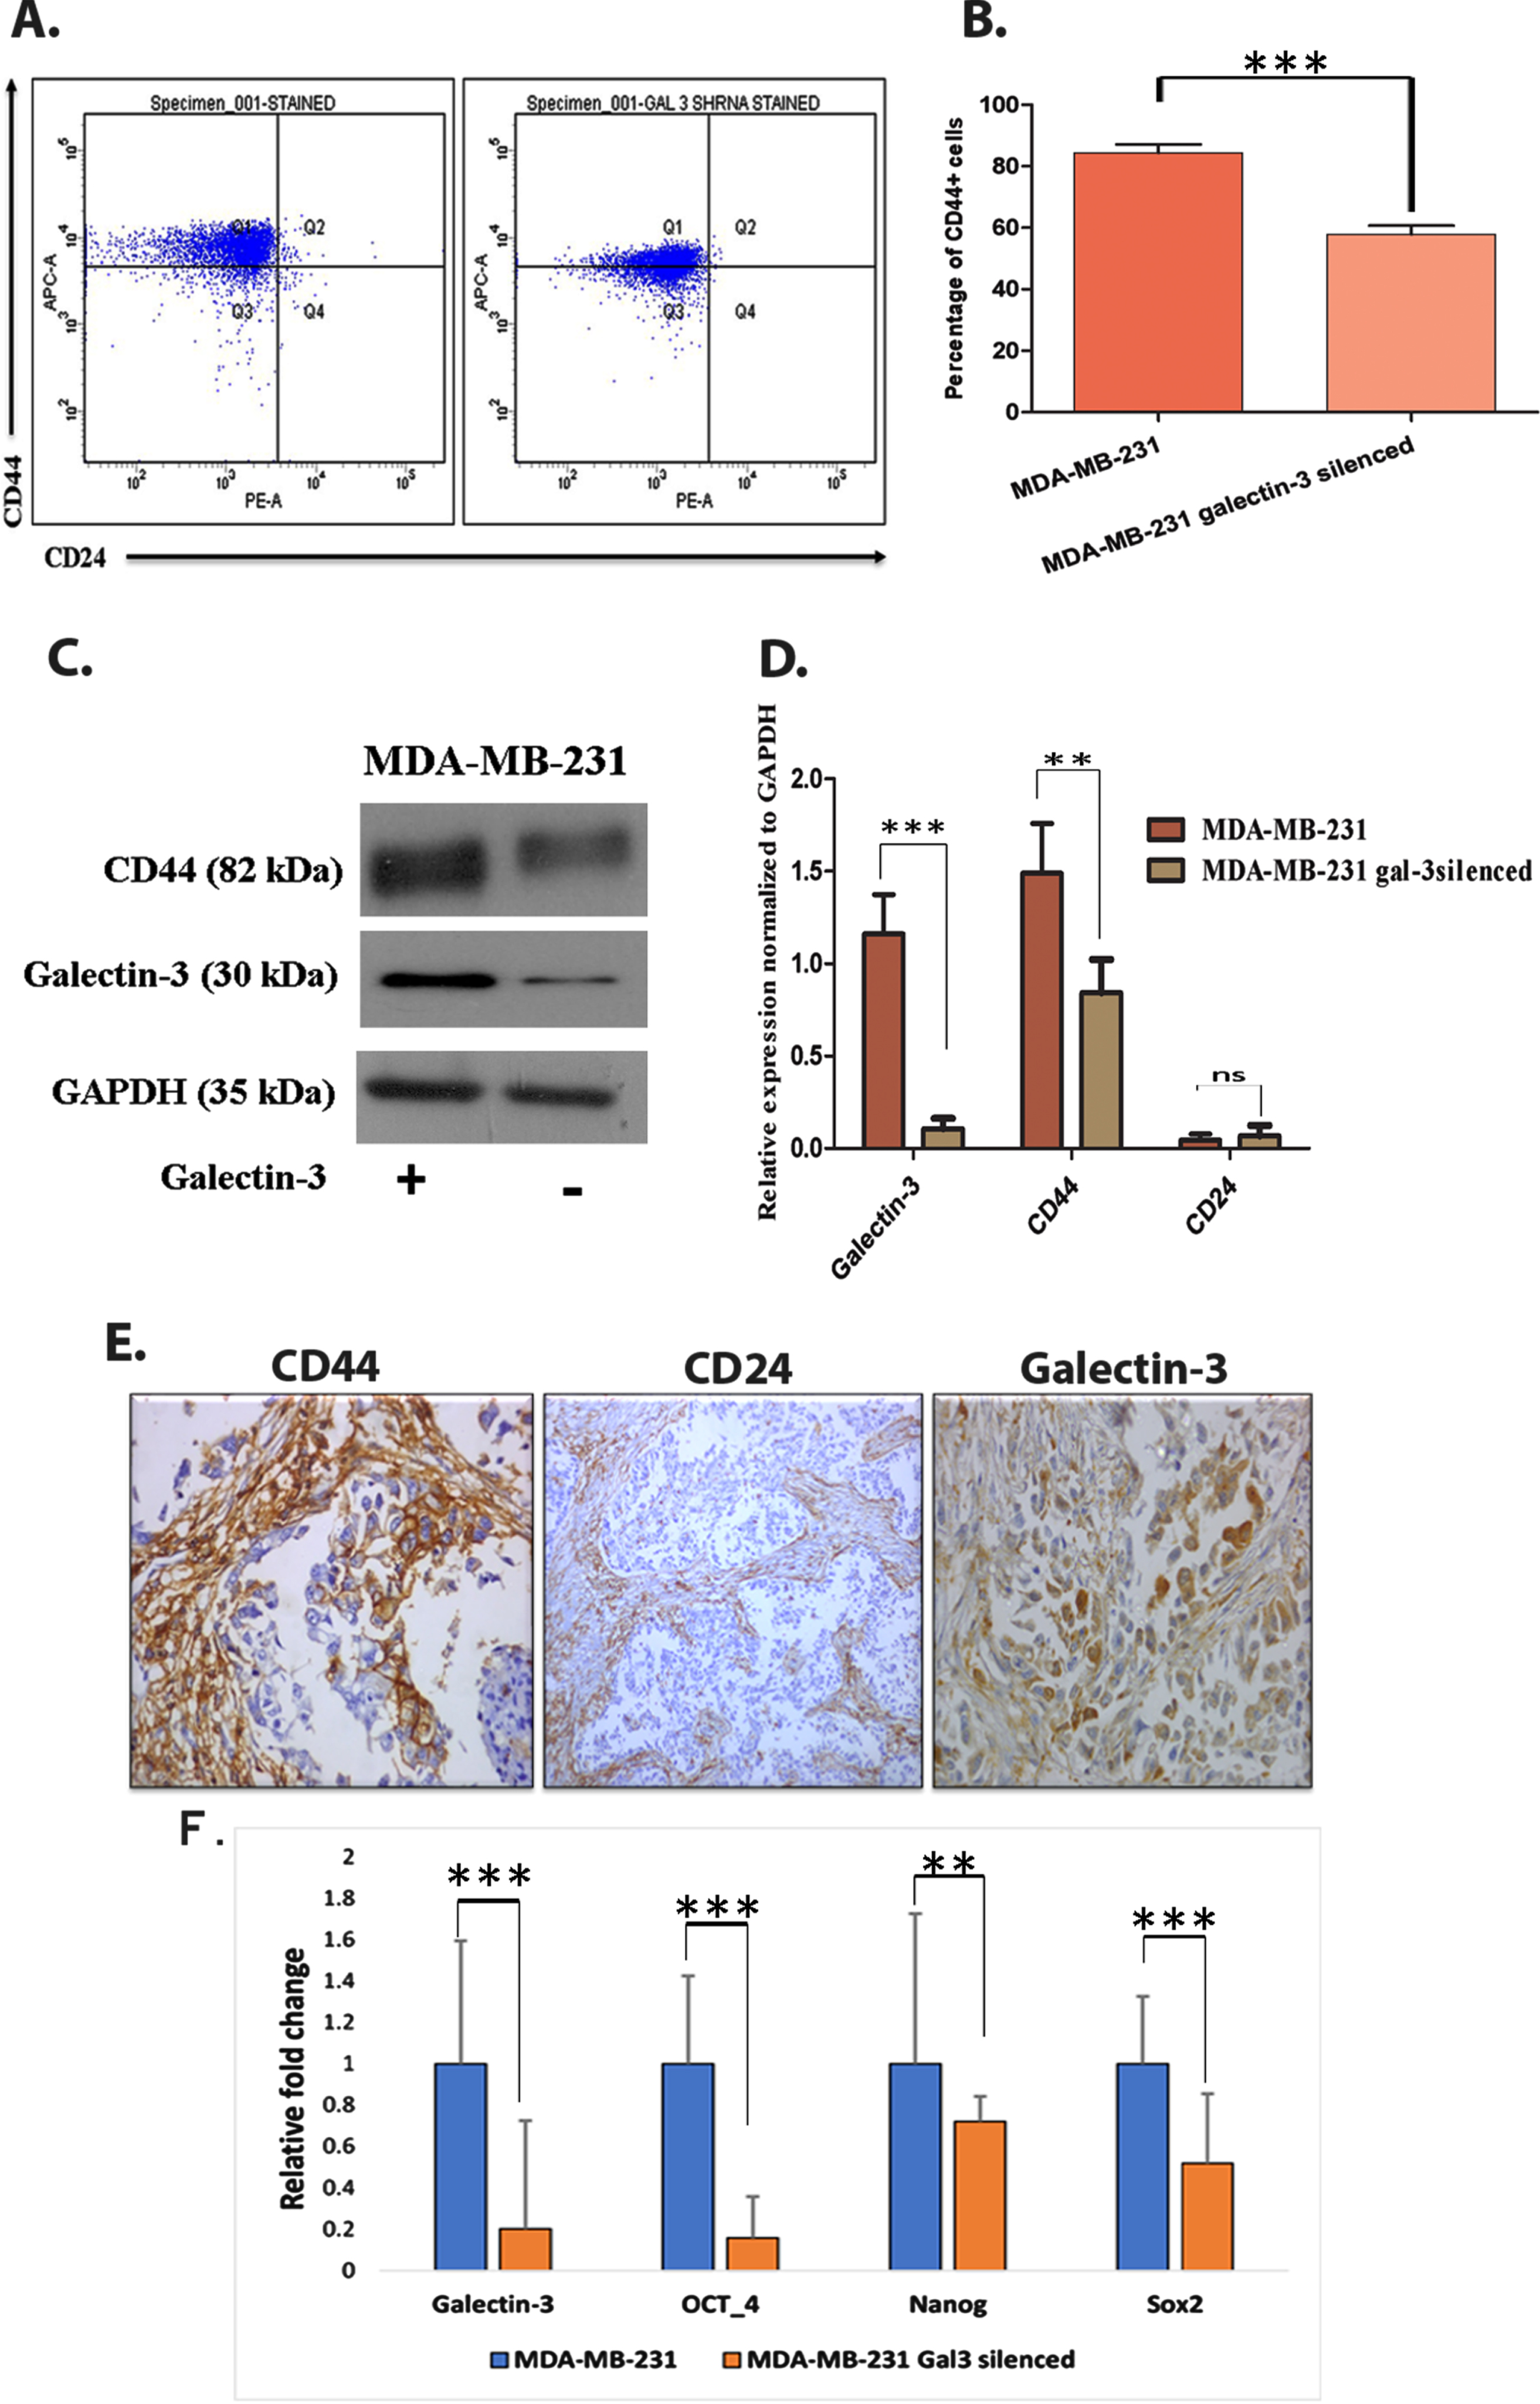 Galectin-3 expression contributes in maintaining cancer stem-like cells A. Using CD44+/CD24– assay, stem cell marker (CD44+ and CD24–) expressing cells were flow cytometrically analyzed using anti-CD44-APC- and anti-CD24- PE-conjugated antibodies. B. Quantification of CD44+/CD24– assay (p = 0.0003). C&D. The stem cell maintaining potential of galectin-3-expressing cells were further confirmed using western blot analysis and its quantification. GADPH was used as the loading control. E. Immunohistochemical analysis showed the presence of stem cells in patients’ samples of primary breast tumors, using anti-CD44, anti-CD24 and anti-galectin-3 antibodies. F. MDA-MB-231 cells and MDA-MB-231 galectin-3-silenced cells were subjected to qRT-PCR analysis as described in Materials and methods with specific primers for the expression of galectin-3, OCT-4, NANOG and SOX2 genes. The primer sequences are available in supplementary data, Table 1. Data represented in (B, D and F) are mean±SD (n = 3) calculated using GraphPad Prism 5.01. The criteria for significance were p < 0.05 (*), p < 0.01 (**), and p < 0.001 (***) and ns means no statistical significance.